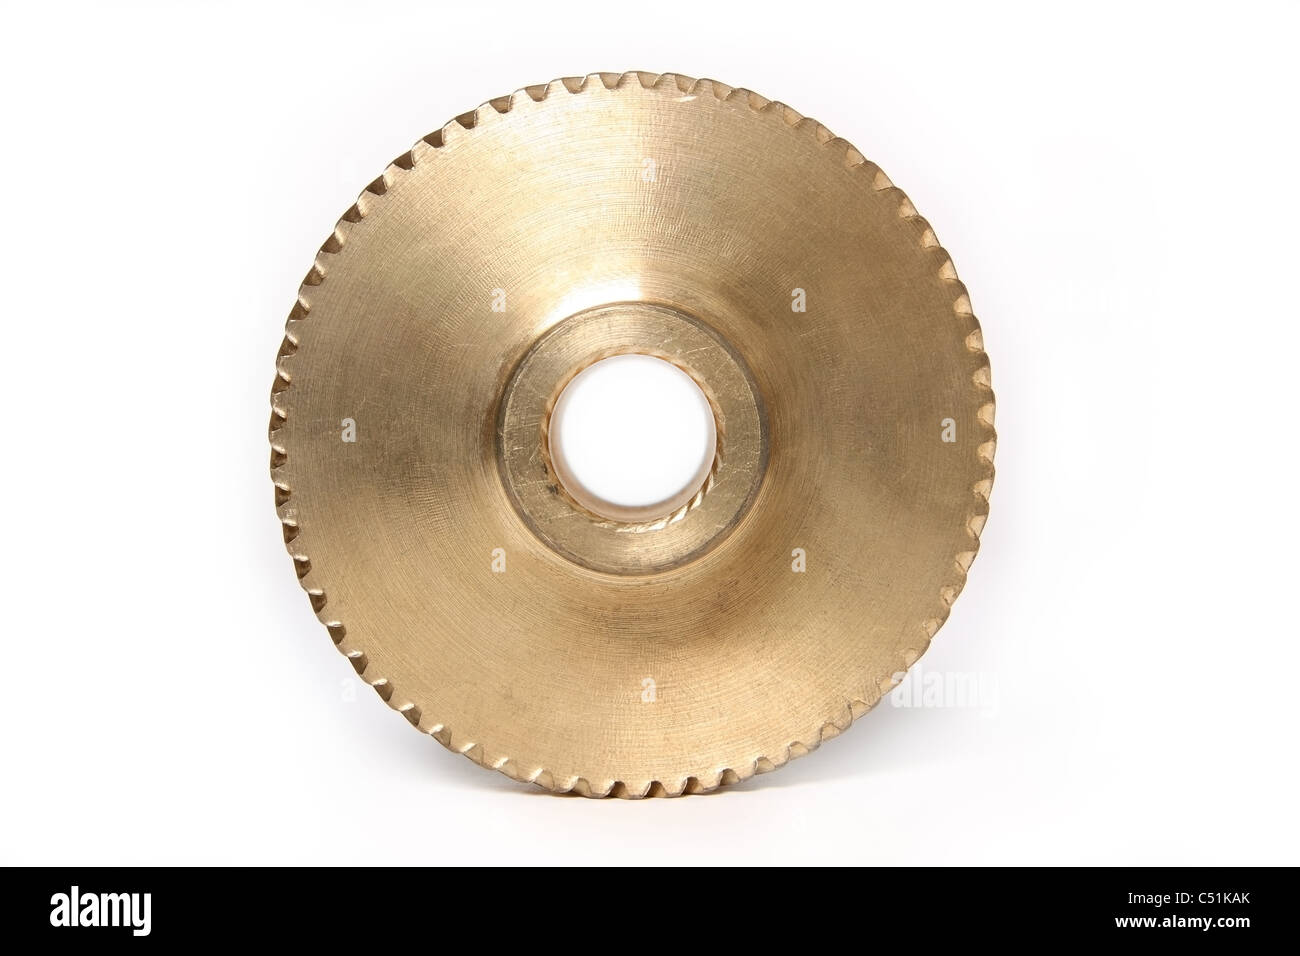 One bronze gear on a white background Stock Photo